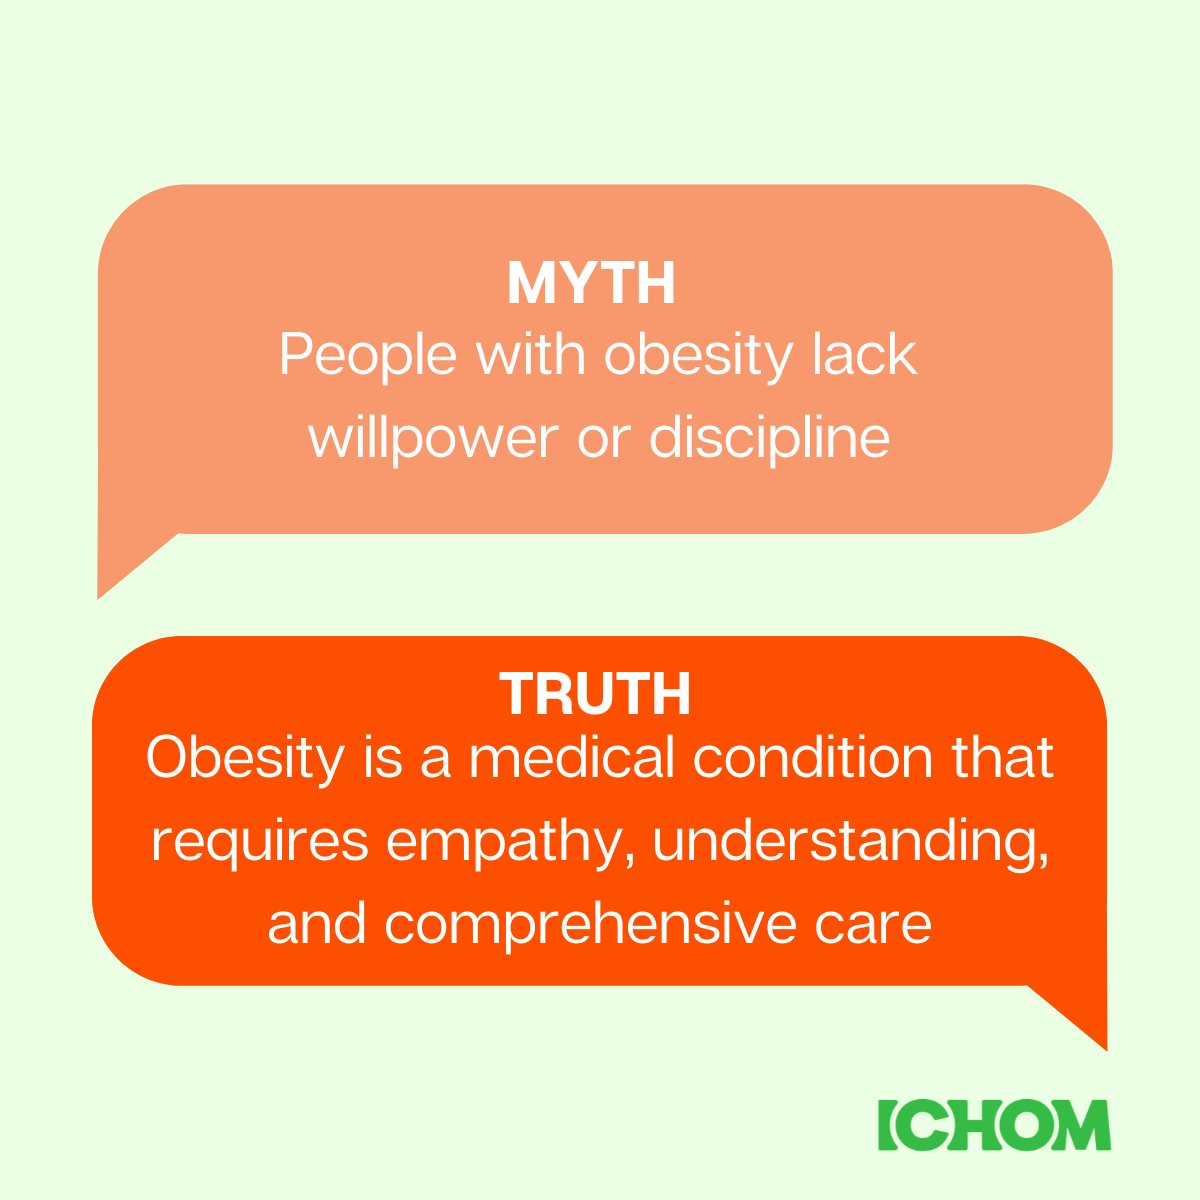 This World Obesity Day, let's dispel myths! At ICHOM, we team up worldwide with healthcare professionals, researchers & patients to define vital outcomes. Your opinions will help us better understand broader perspectives of the Obesity Set: bit.ly/49WFwiX